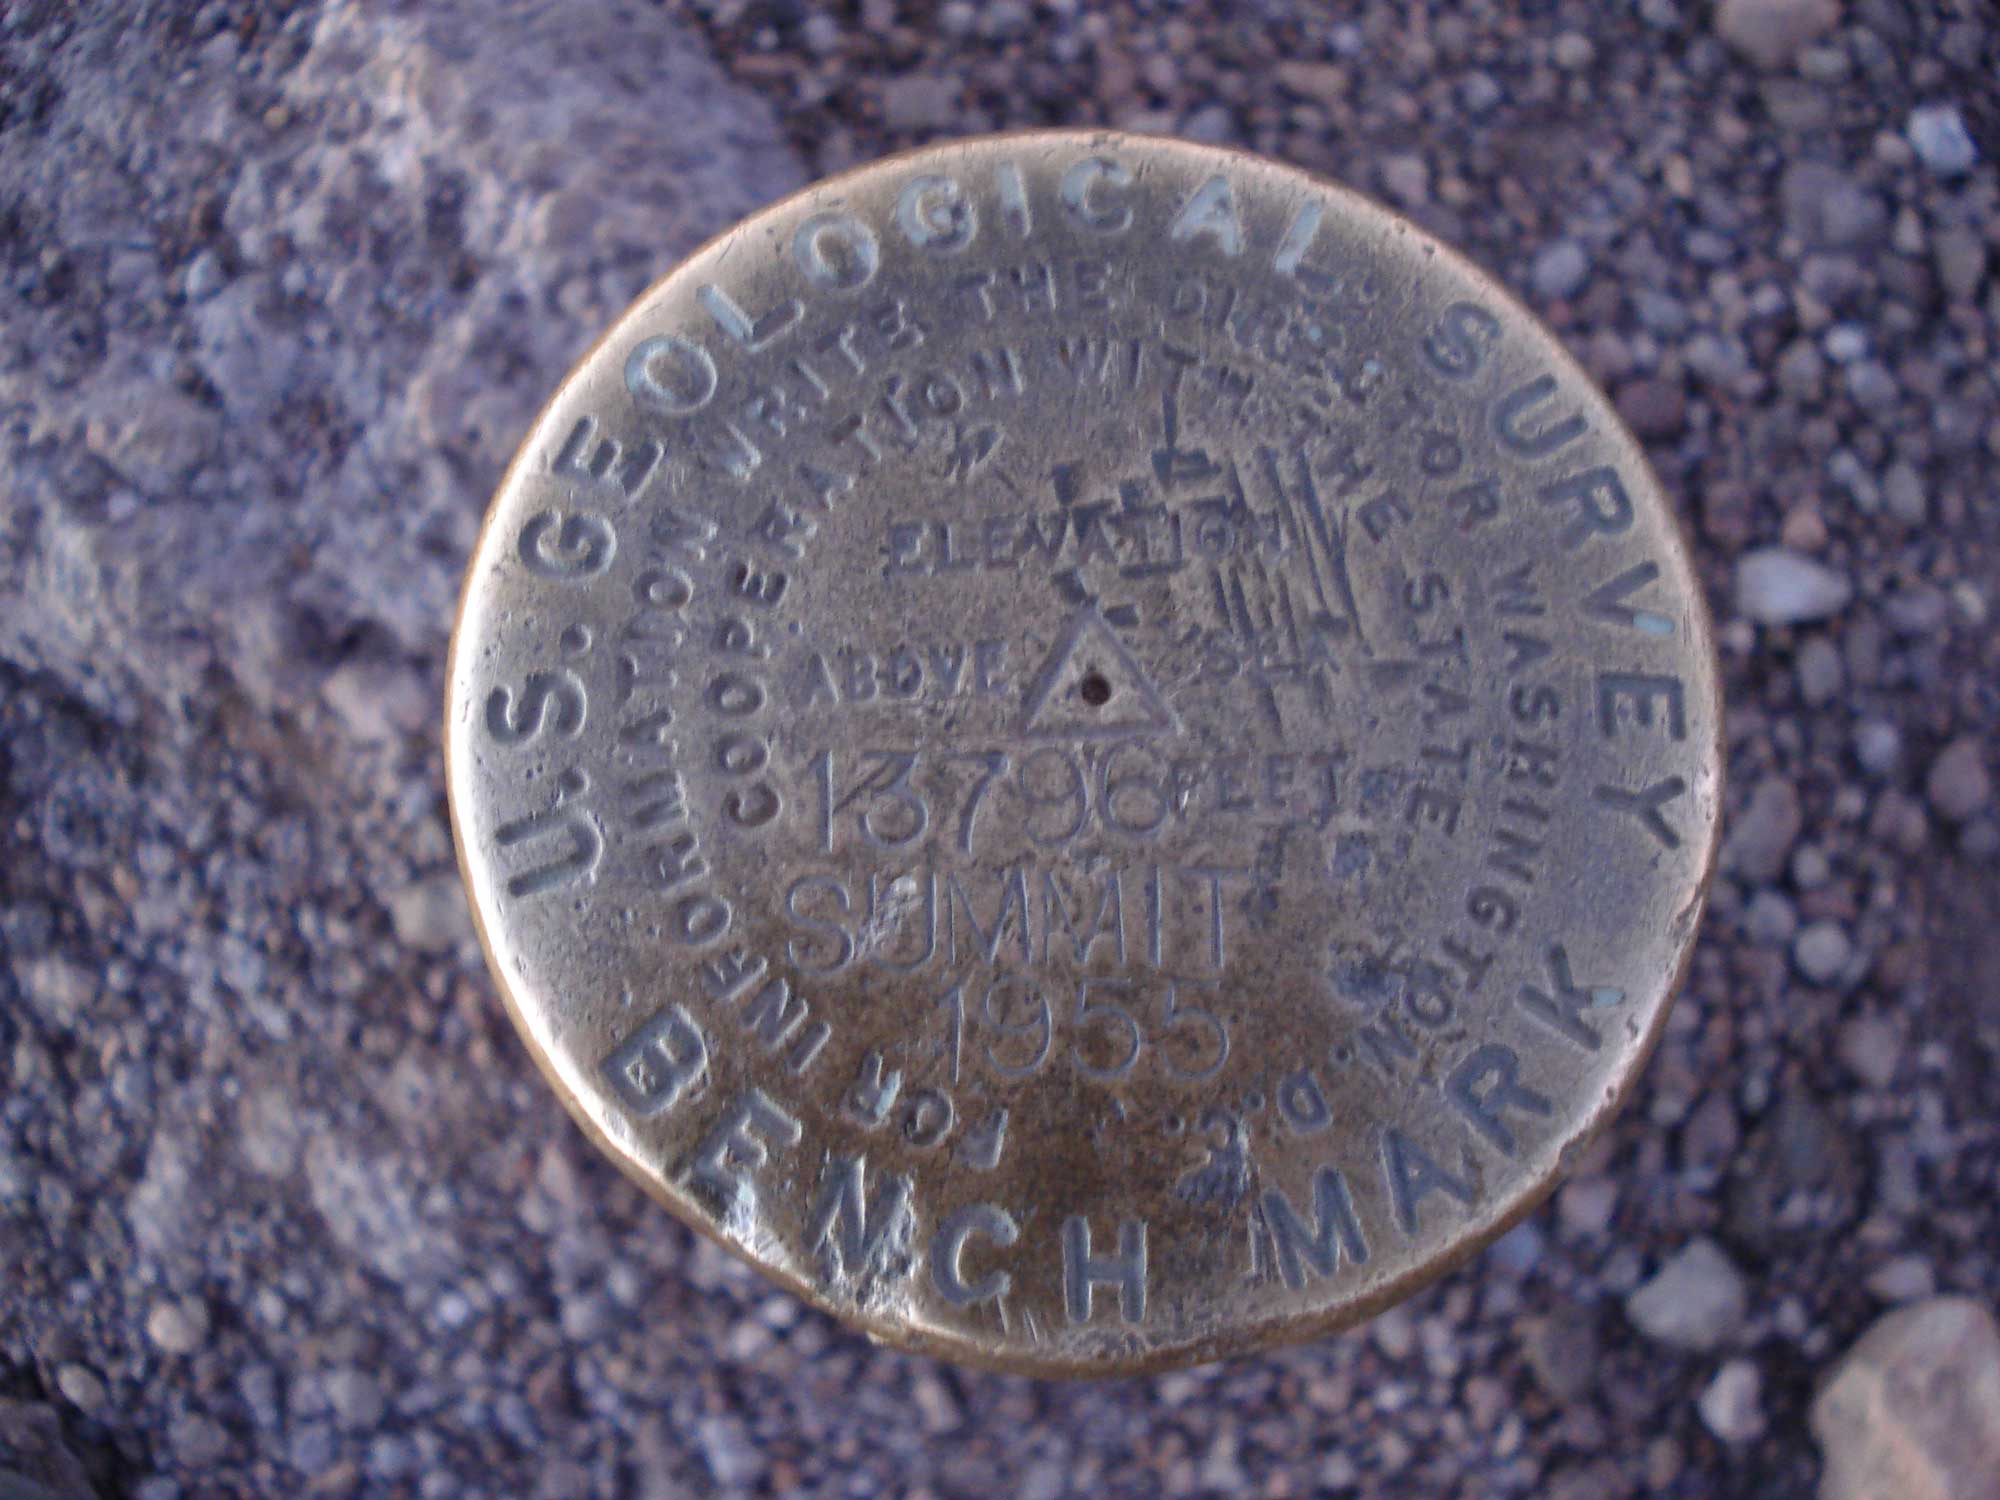 Photograph of the USGS marker that indicates the summit of Mauna Kea in Hawaii.